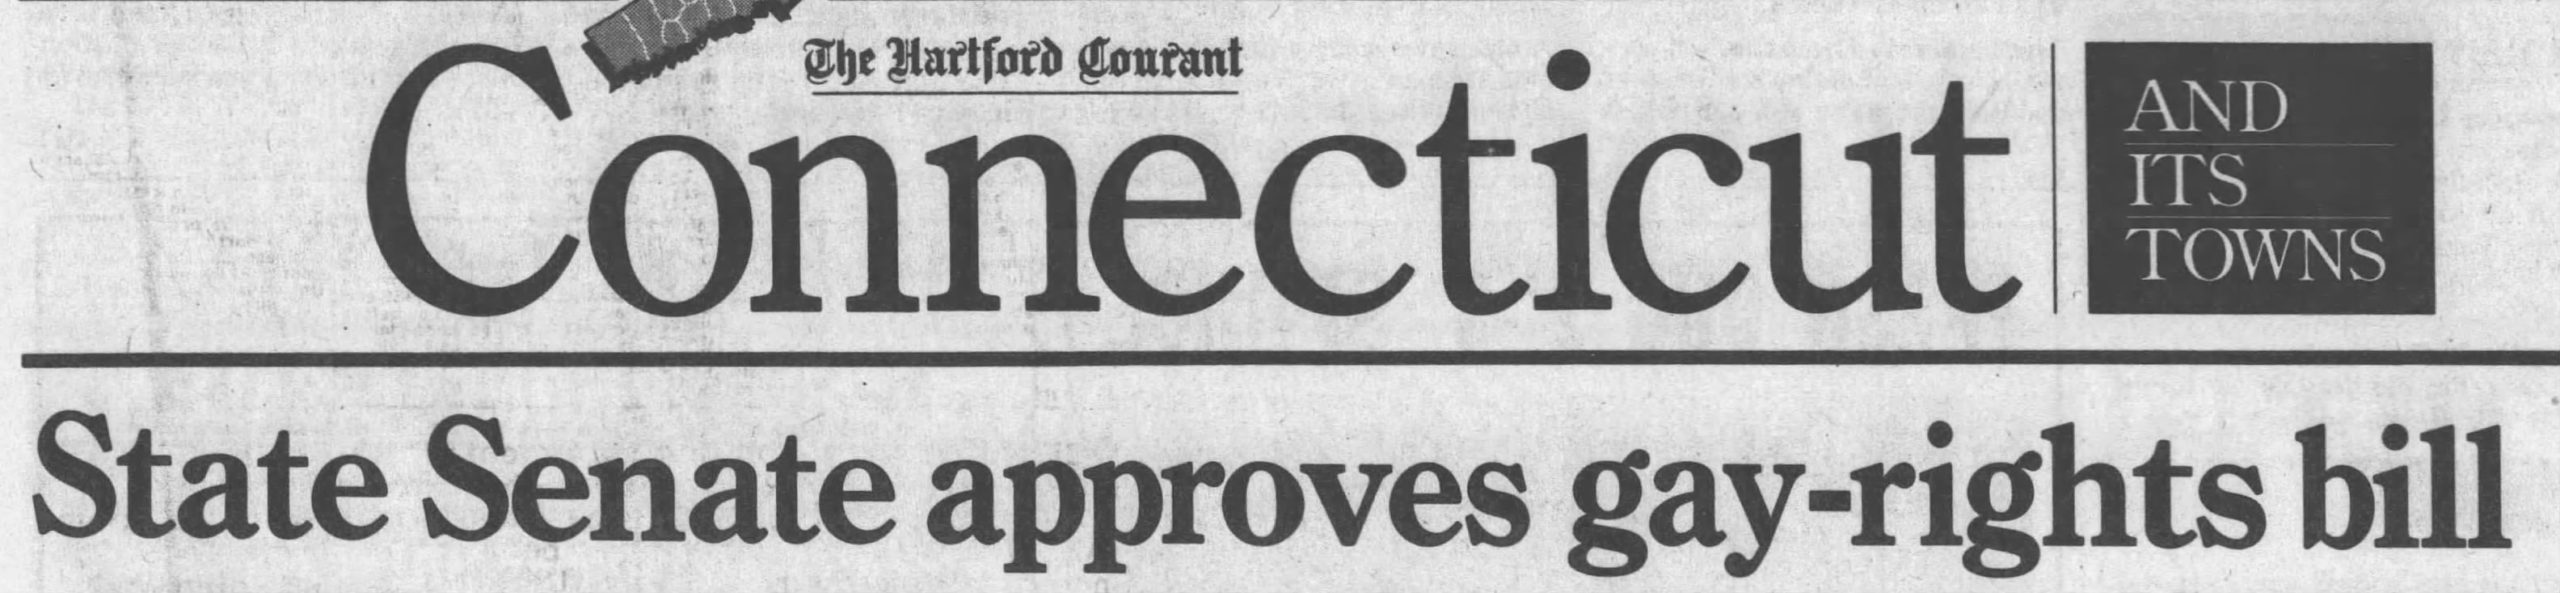 April 18, 1991 Headline after State Senate approved gay-rights bill - Hartford Courant